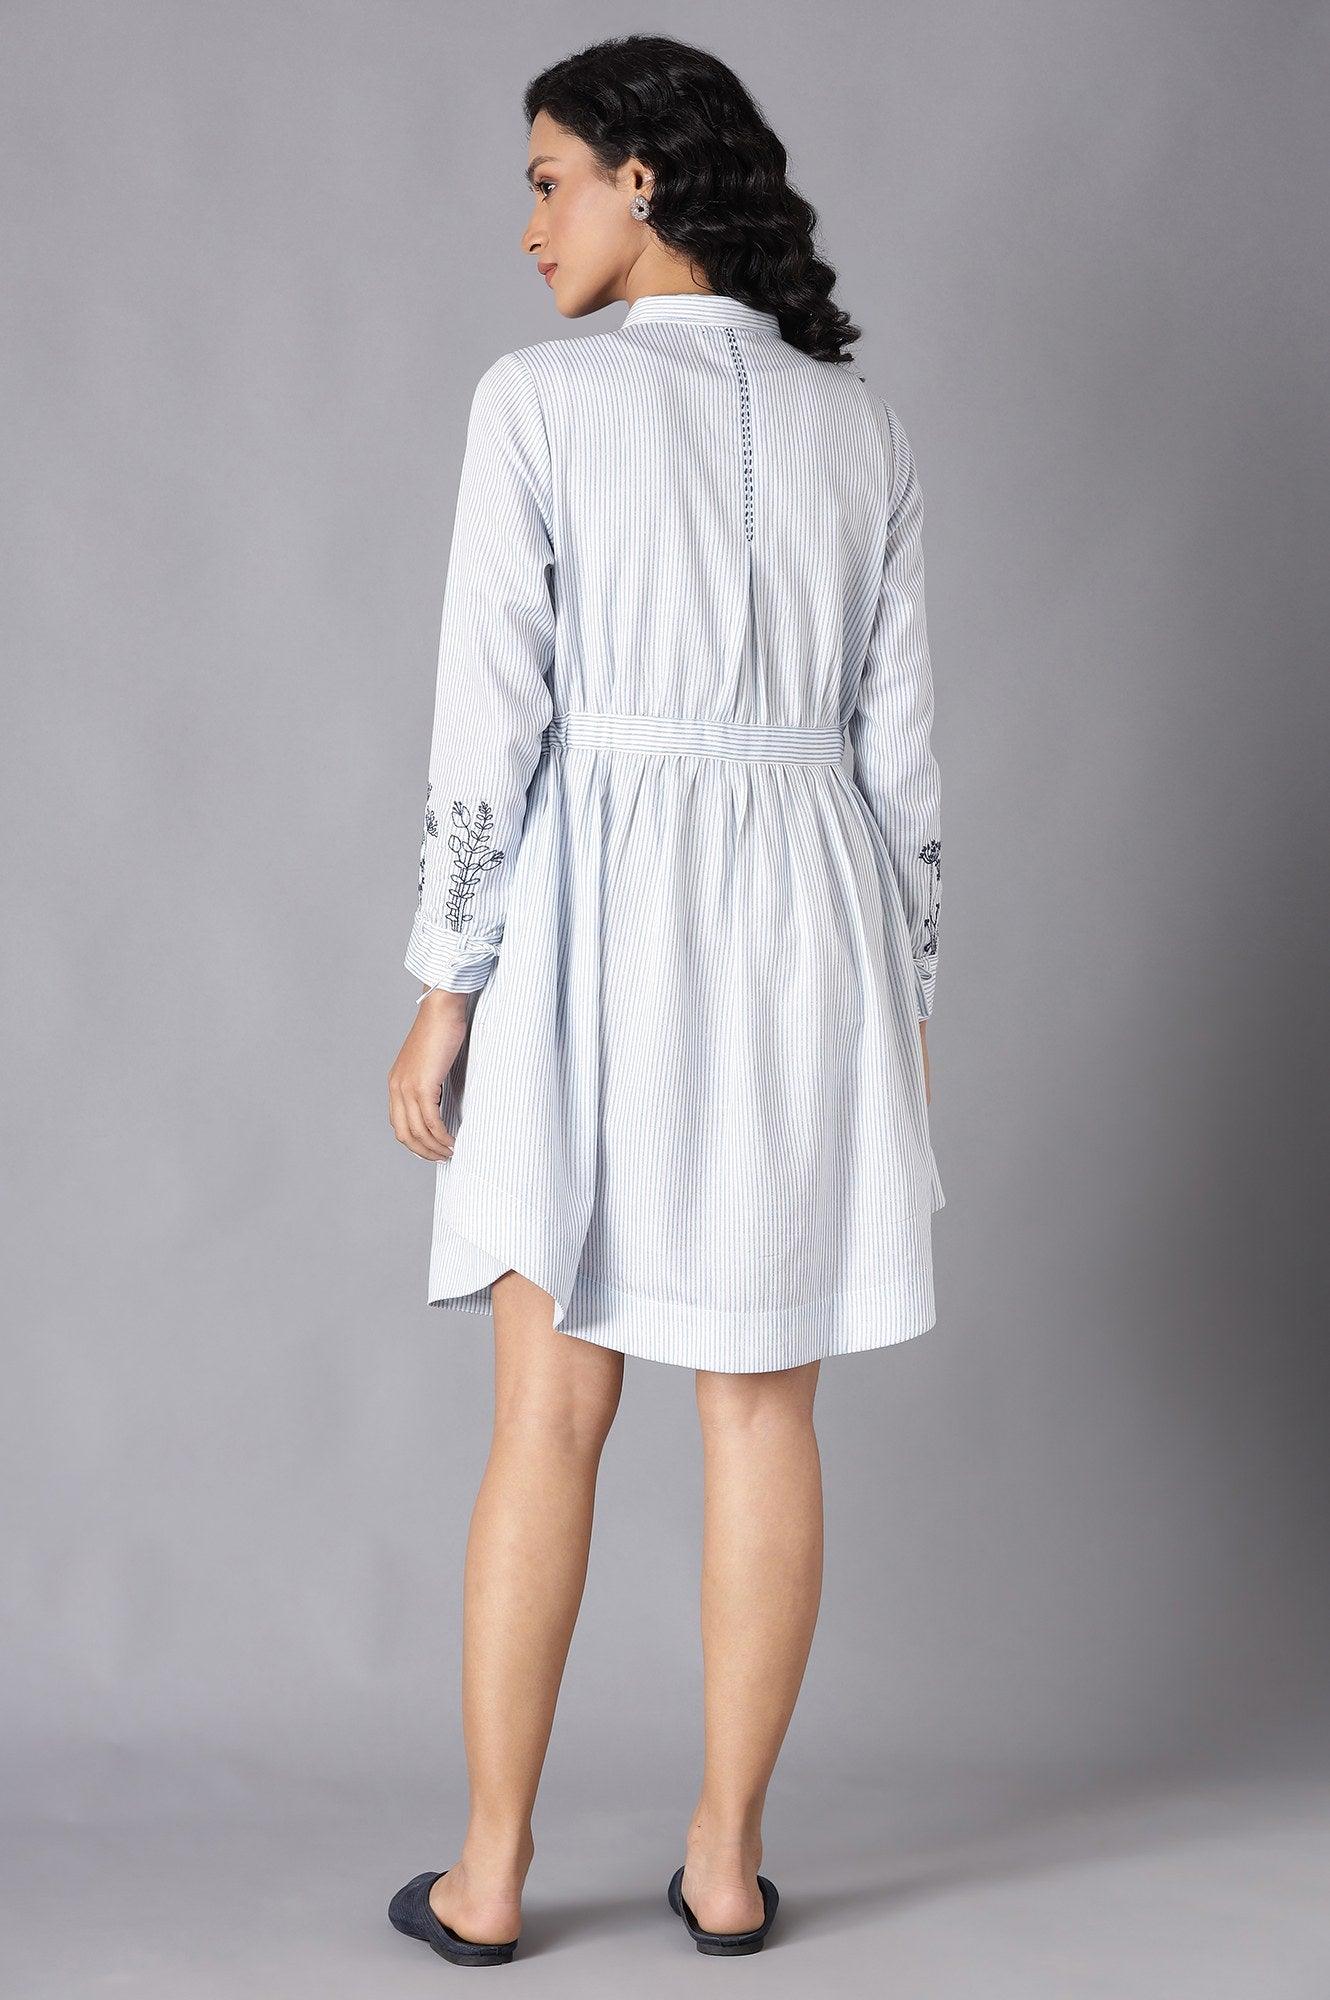 Ecru Stripe Printed Tunic With Belt And Embroidered Sleeves - wforwoman